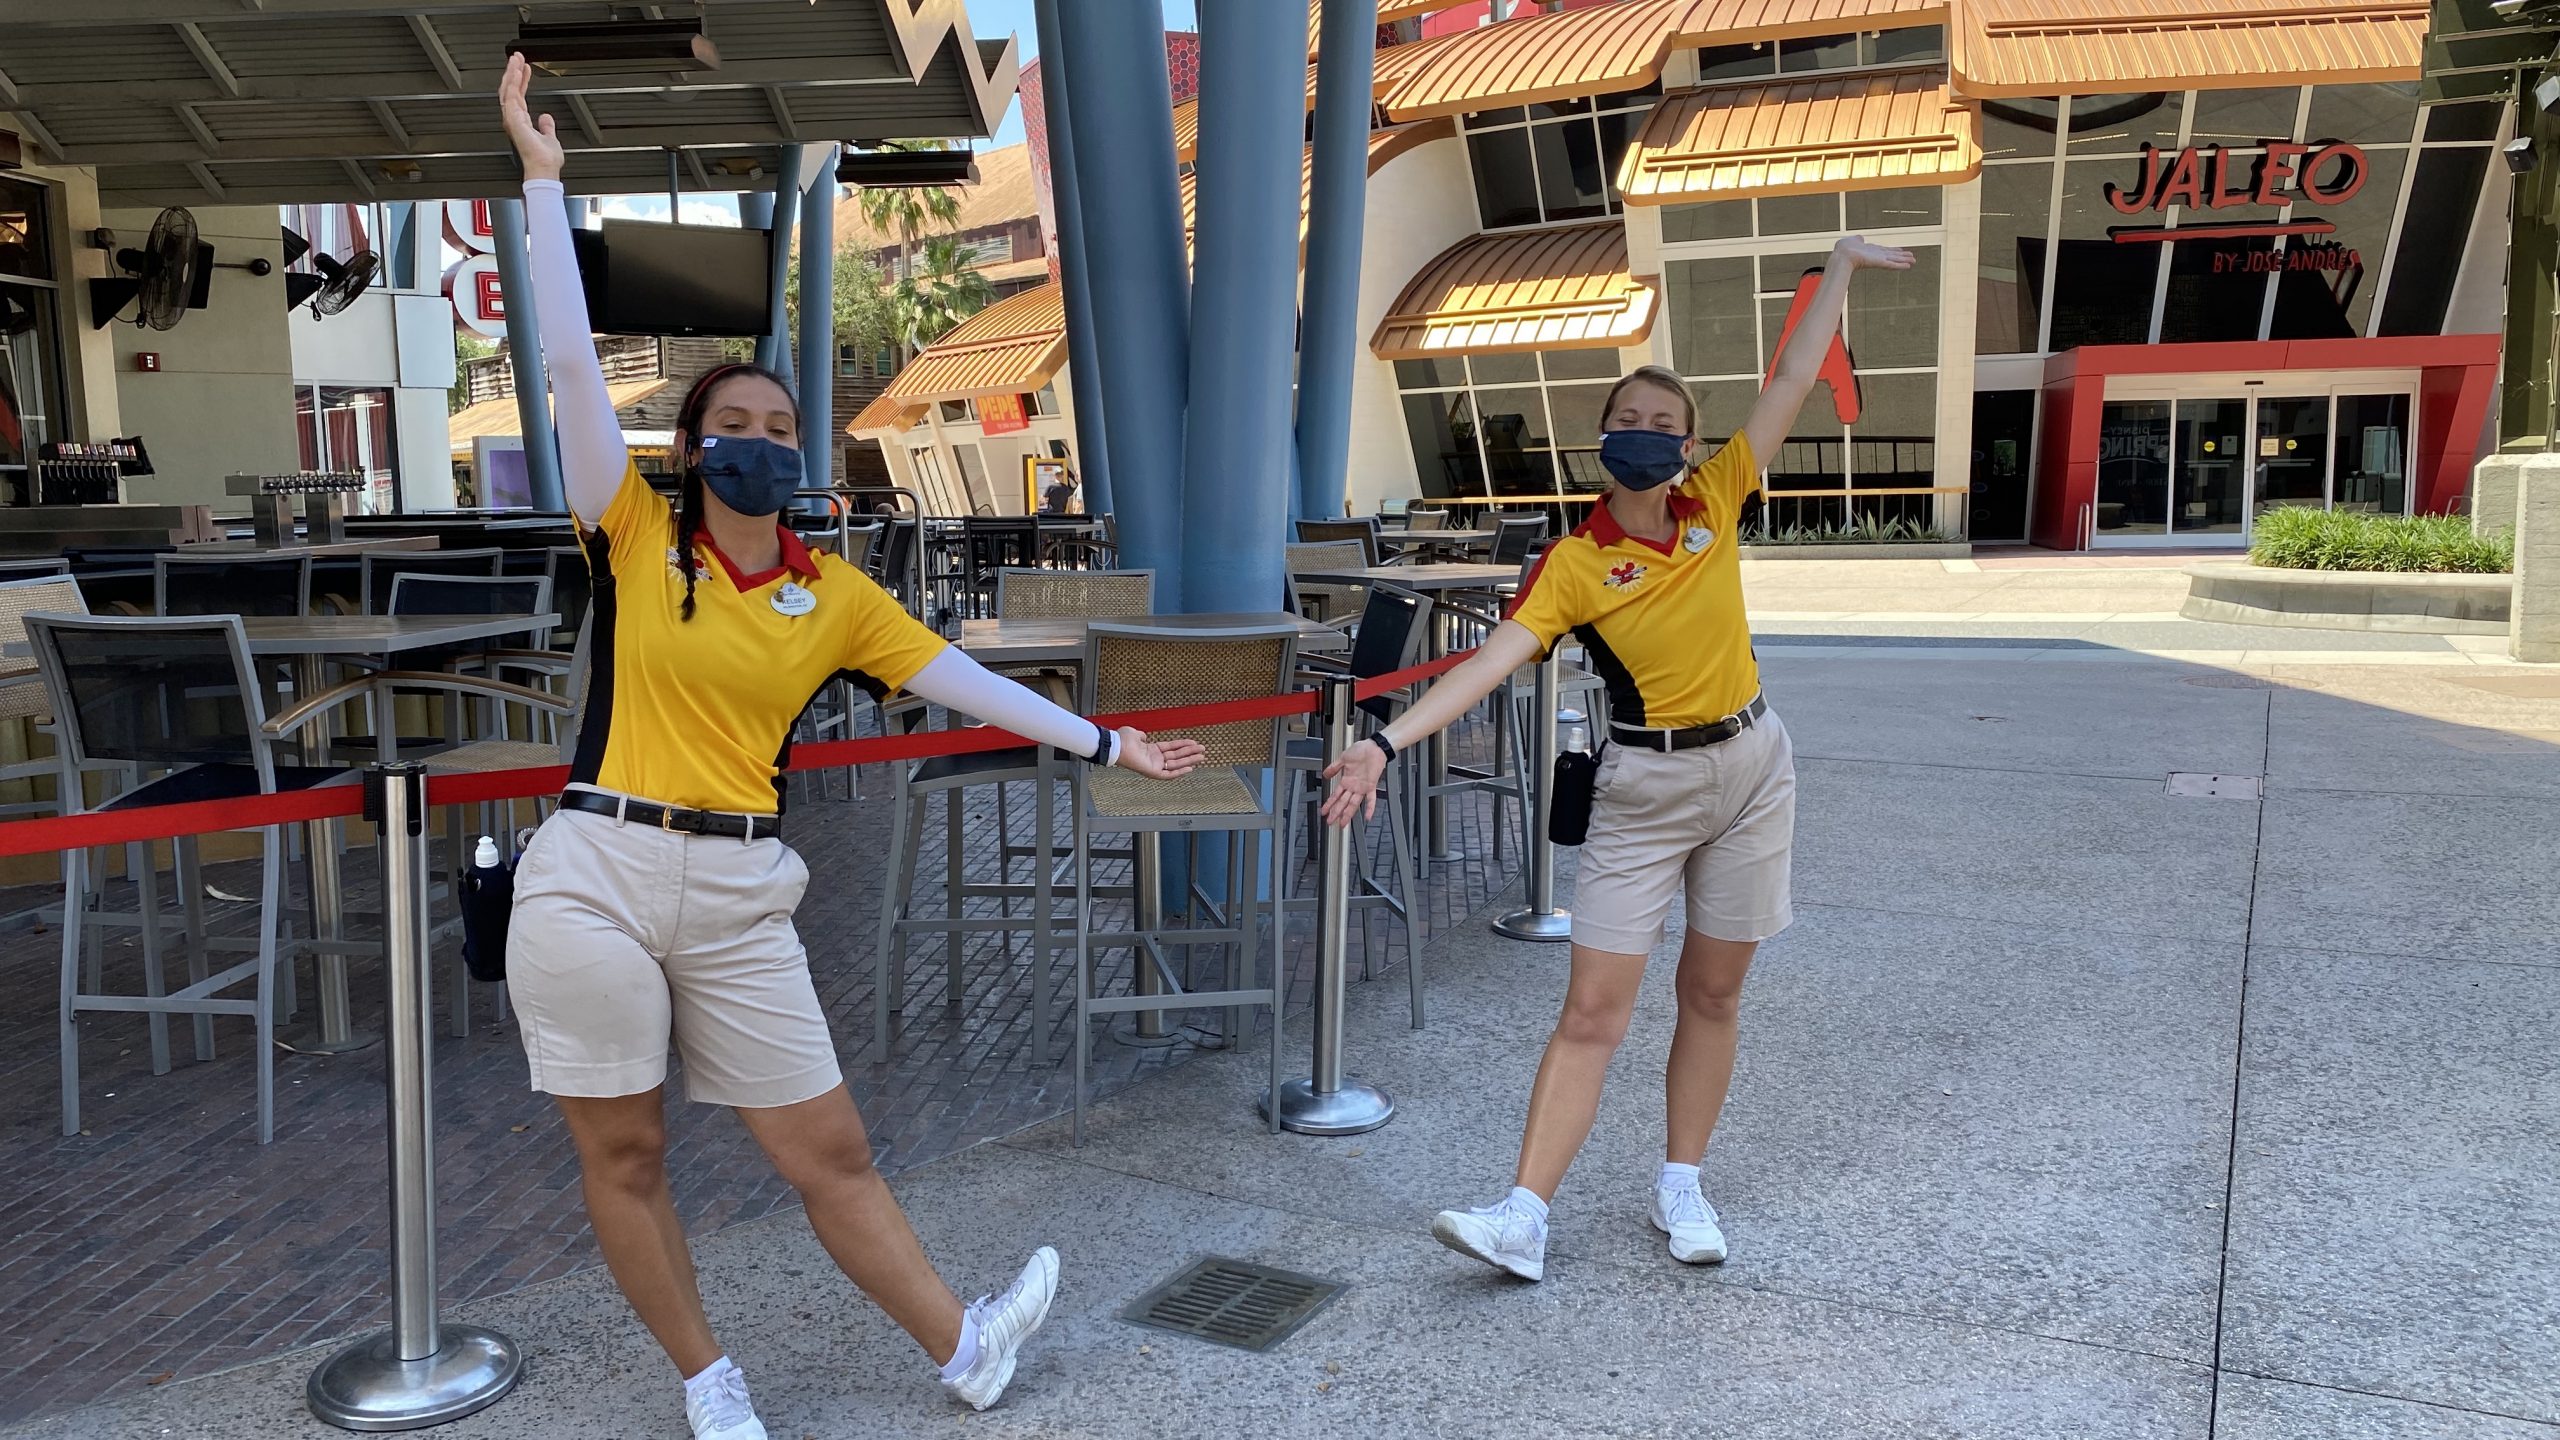 Disney surveying guests about the new COVID-19 policies at Disney Springs